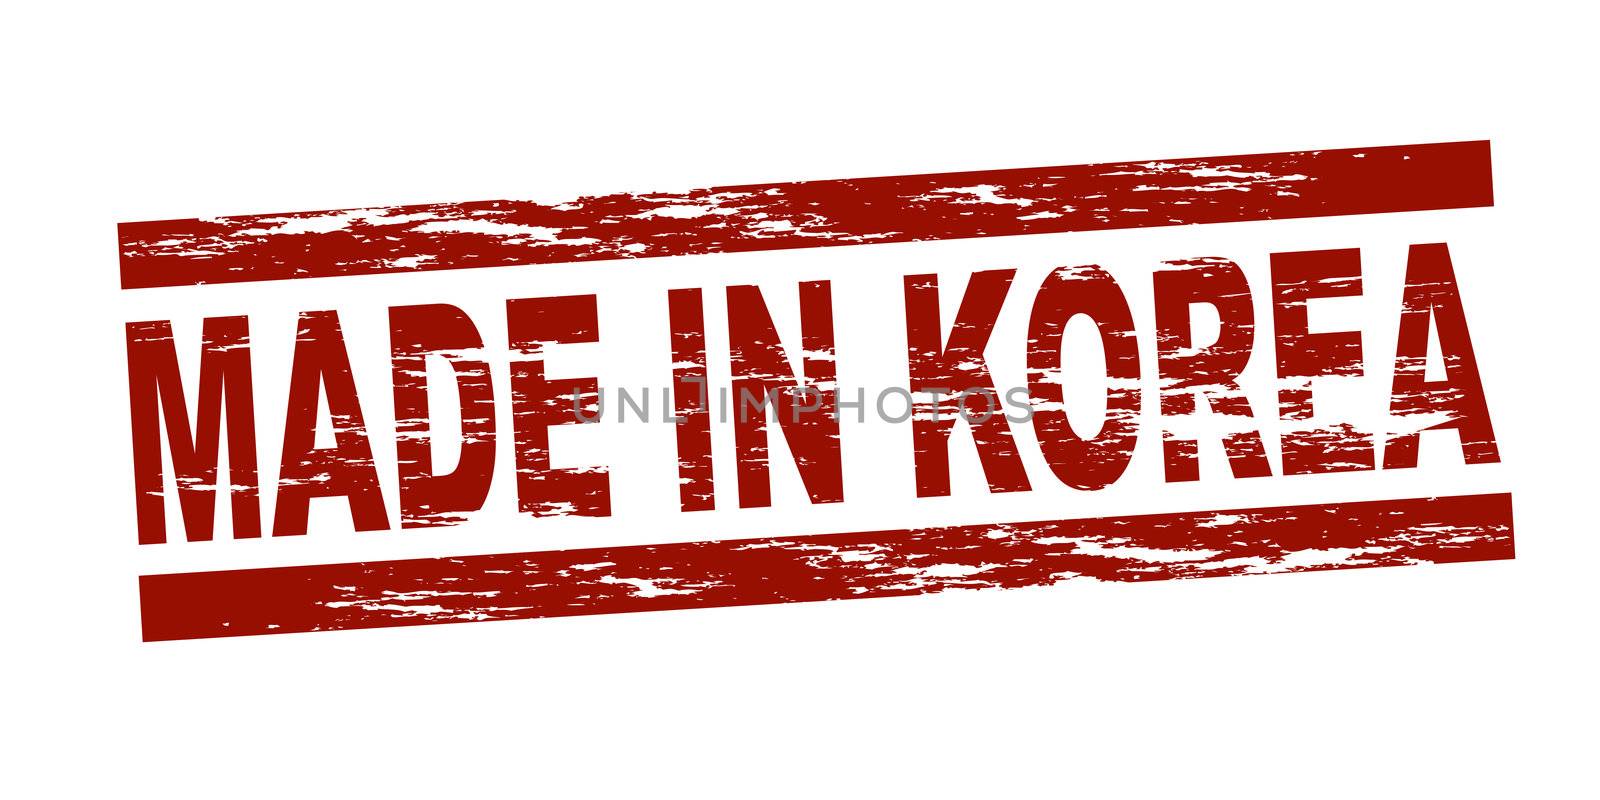 Stylized red stamp showing the term made in korea. All on white background.